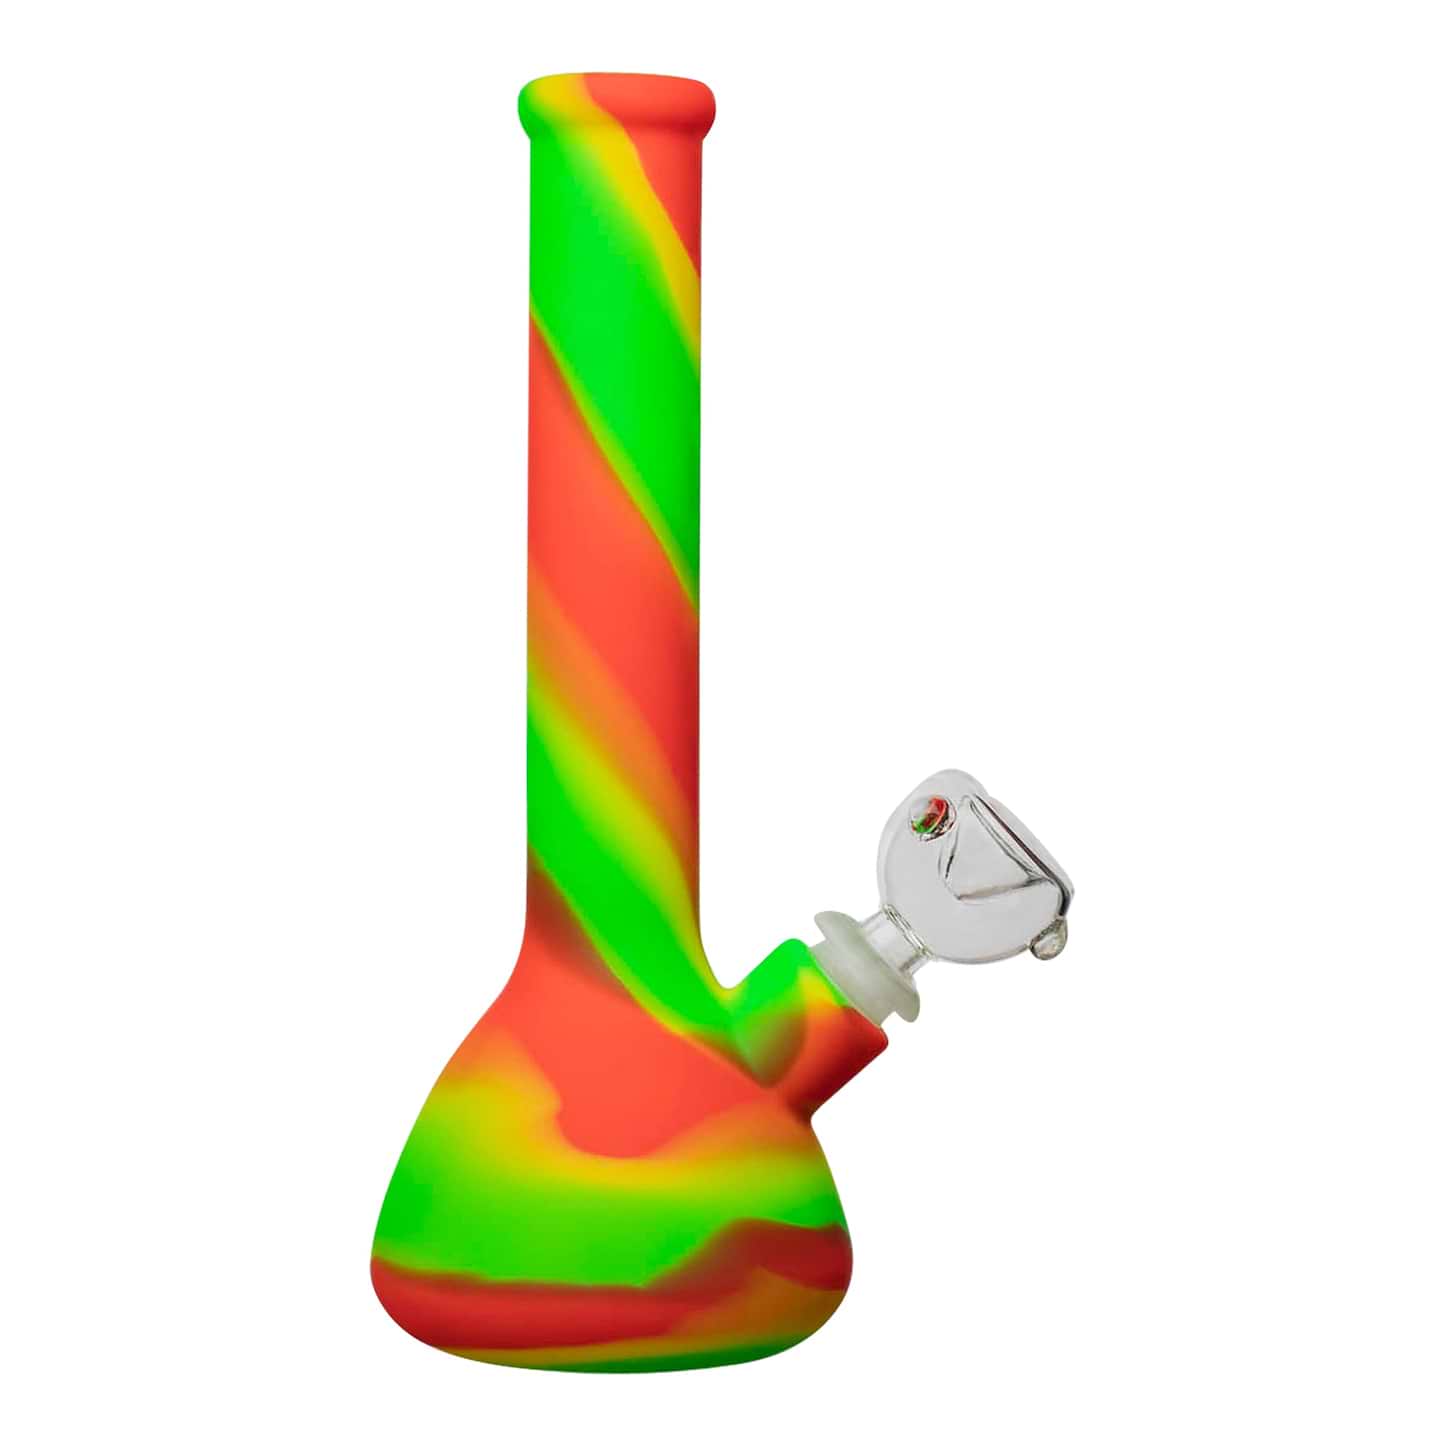 The Squeaky Silicone Beaker Bong - 13in Rasta / Small